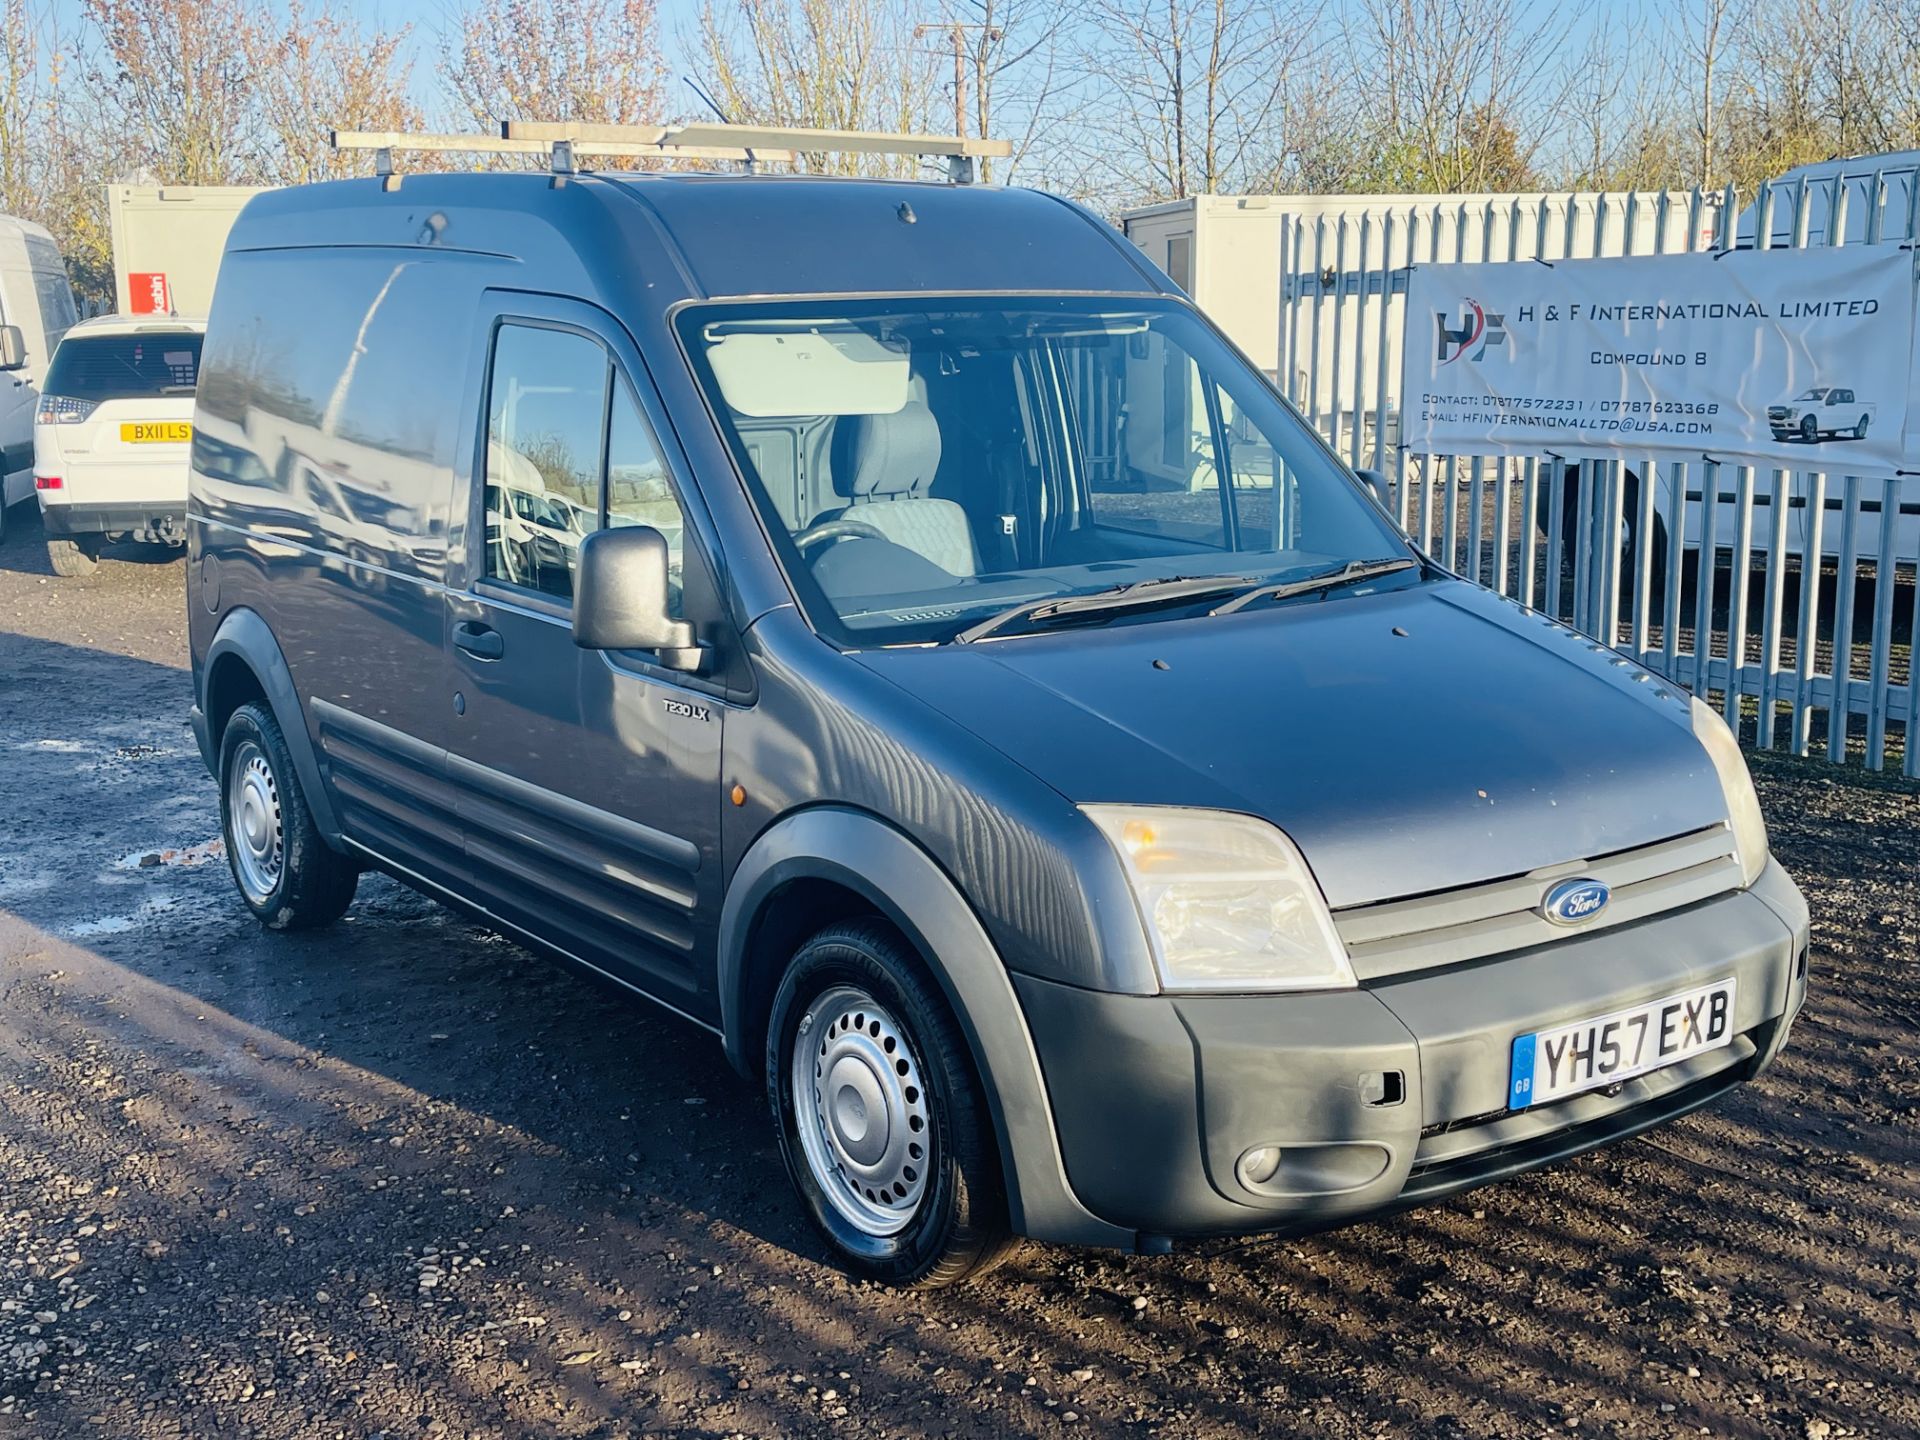 Ford Transit Connect 1.8 TDCI T230 LX110 LWB High Roof 2007 '57 Reg' A/C - No vat save 20% - Image 2 of 20